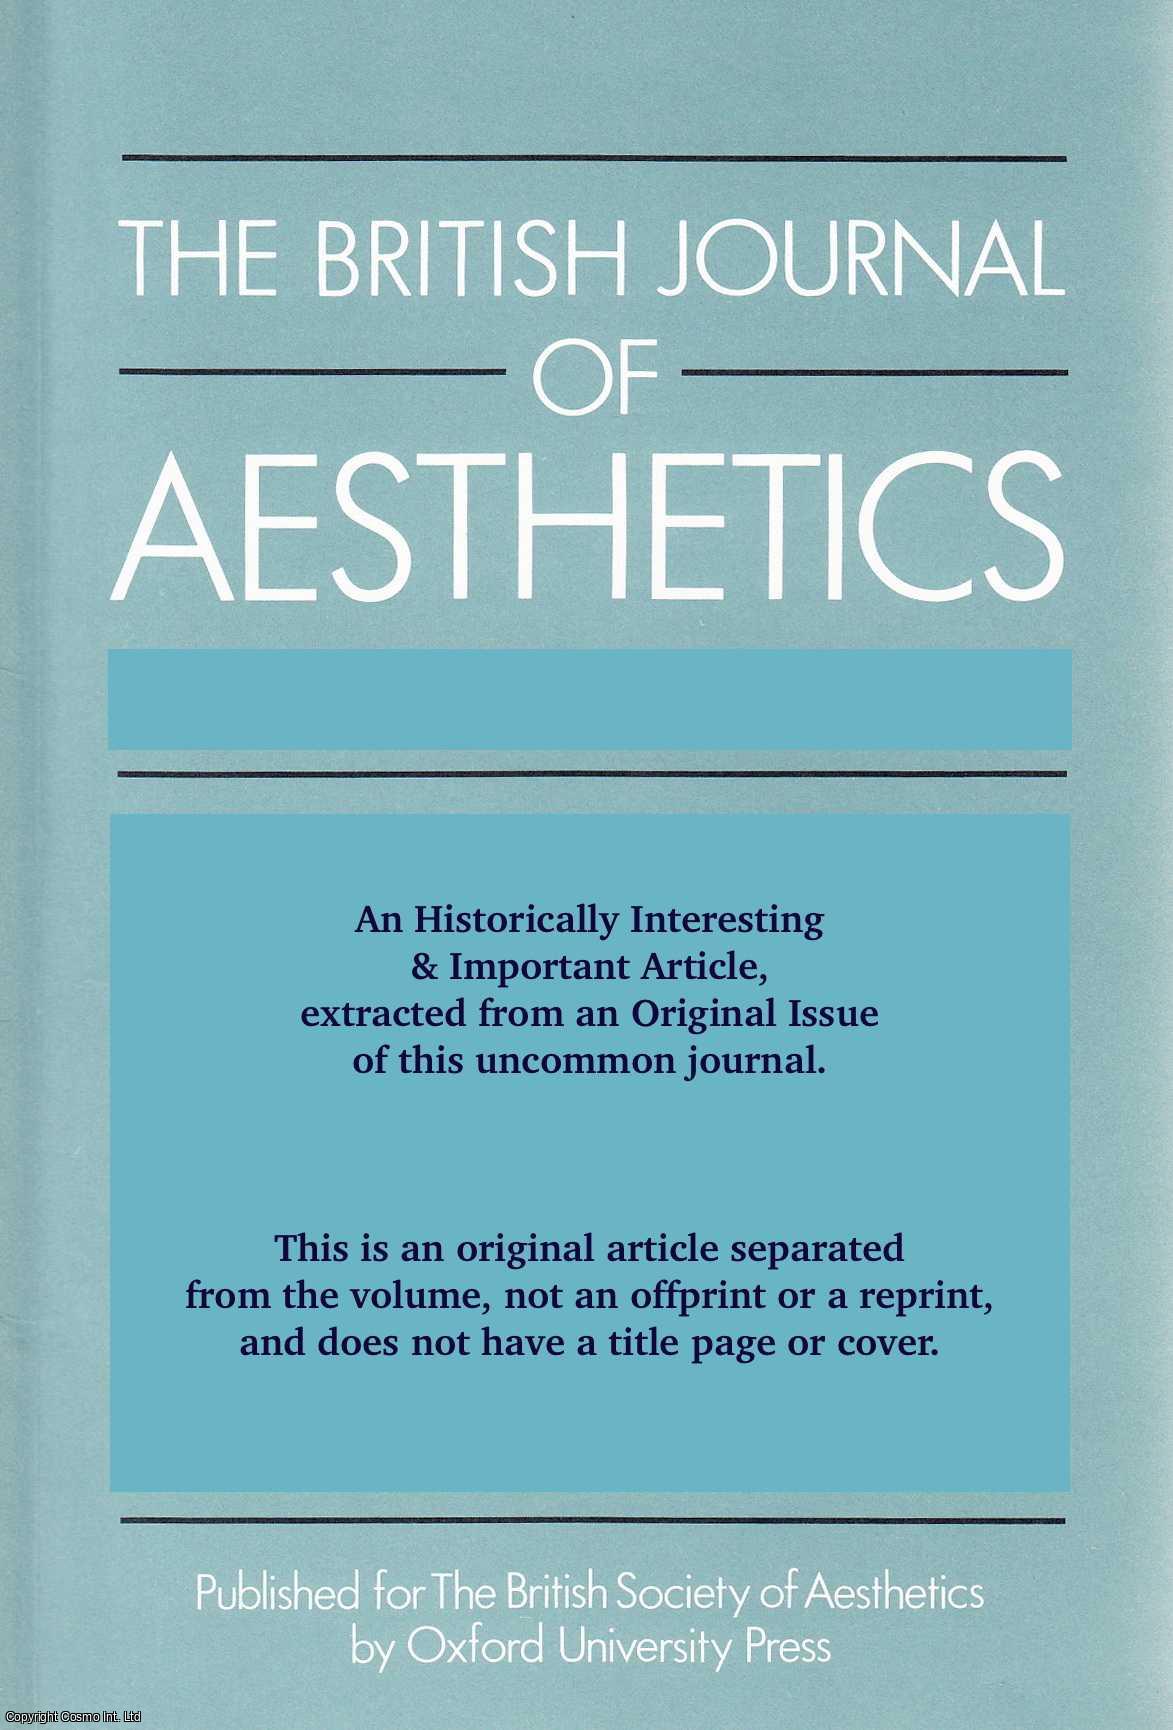 R.W. Beardsmore - Two Trends in Contemporary Aesthetics. An original article from the British Journal of Aesthetics, 1973.